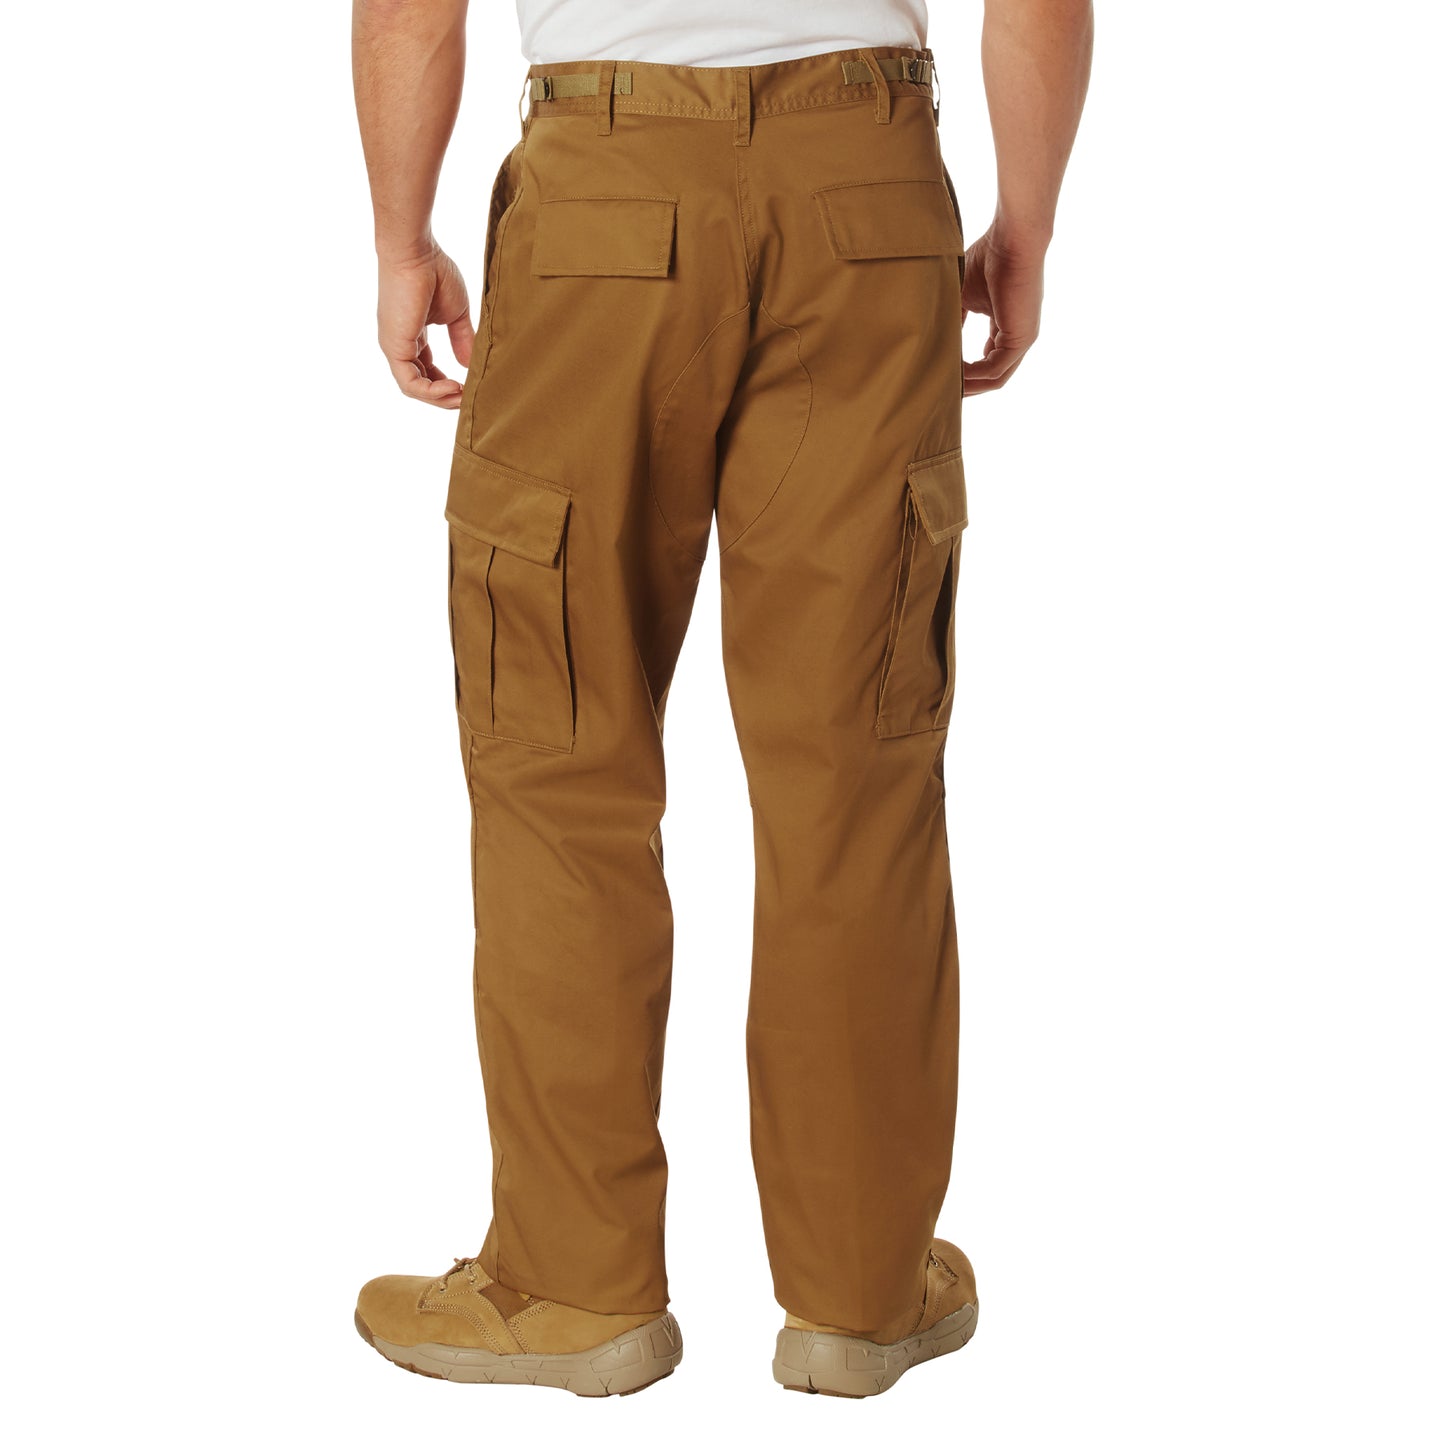 Rothco Tactical BDU Cargo Pants - Work Brown